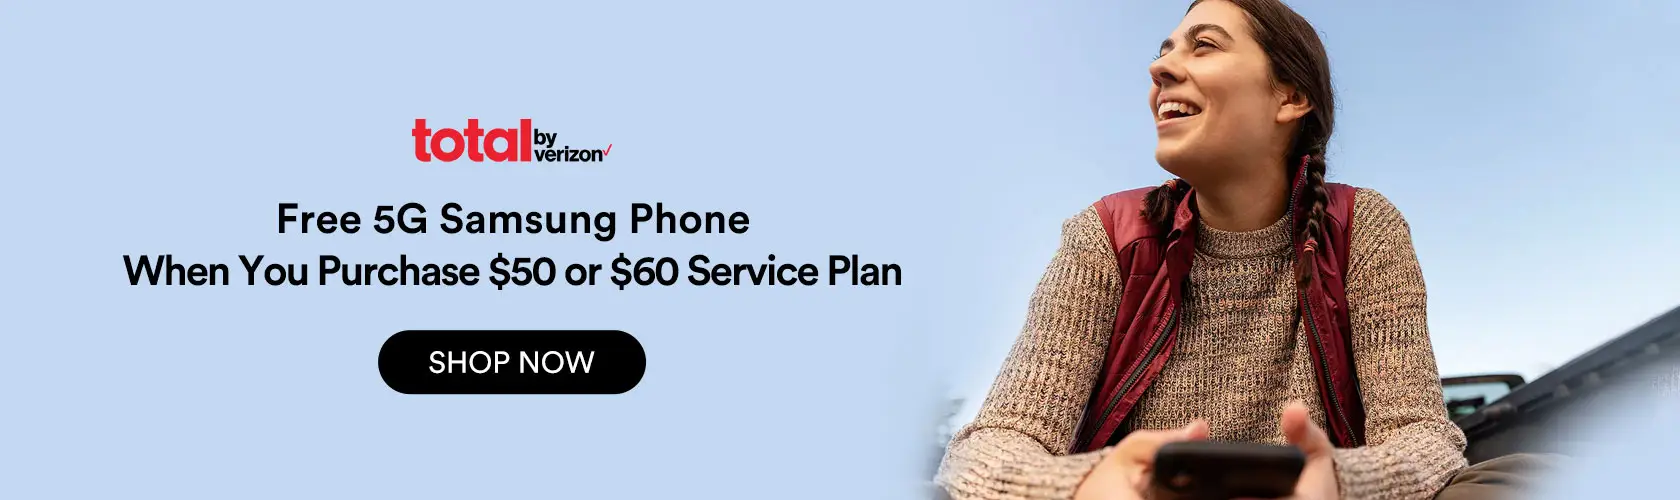 Total by Verizon: Free Phone When You Purchase $50 or $60 Service Plan